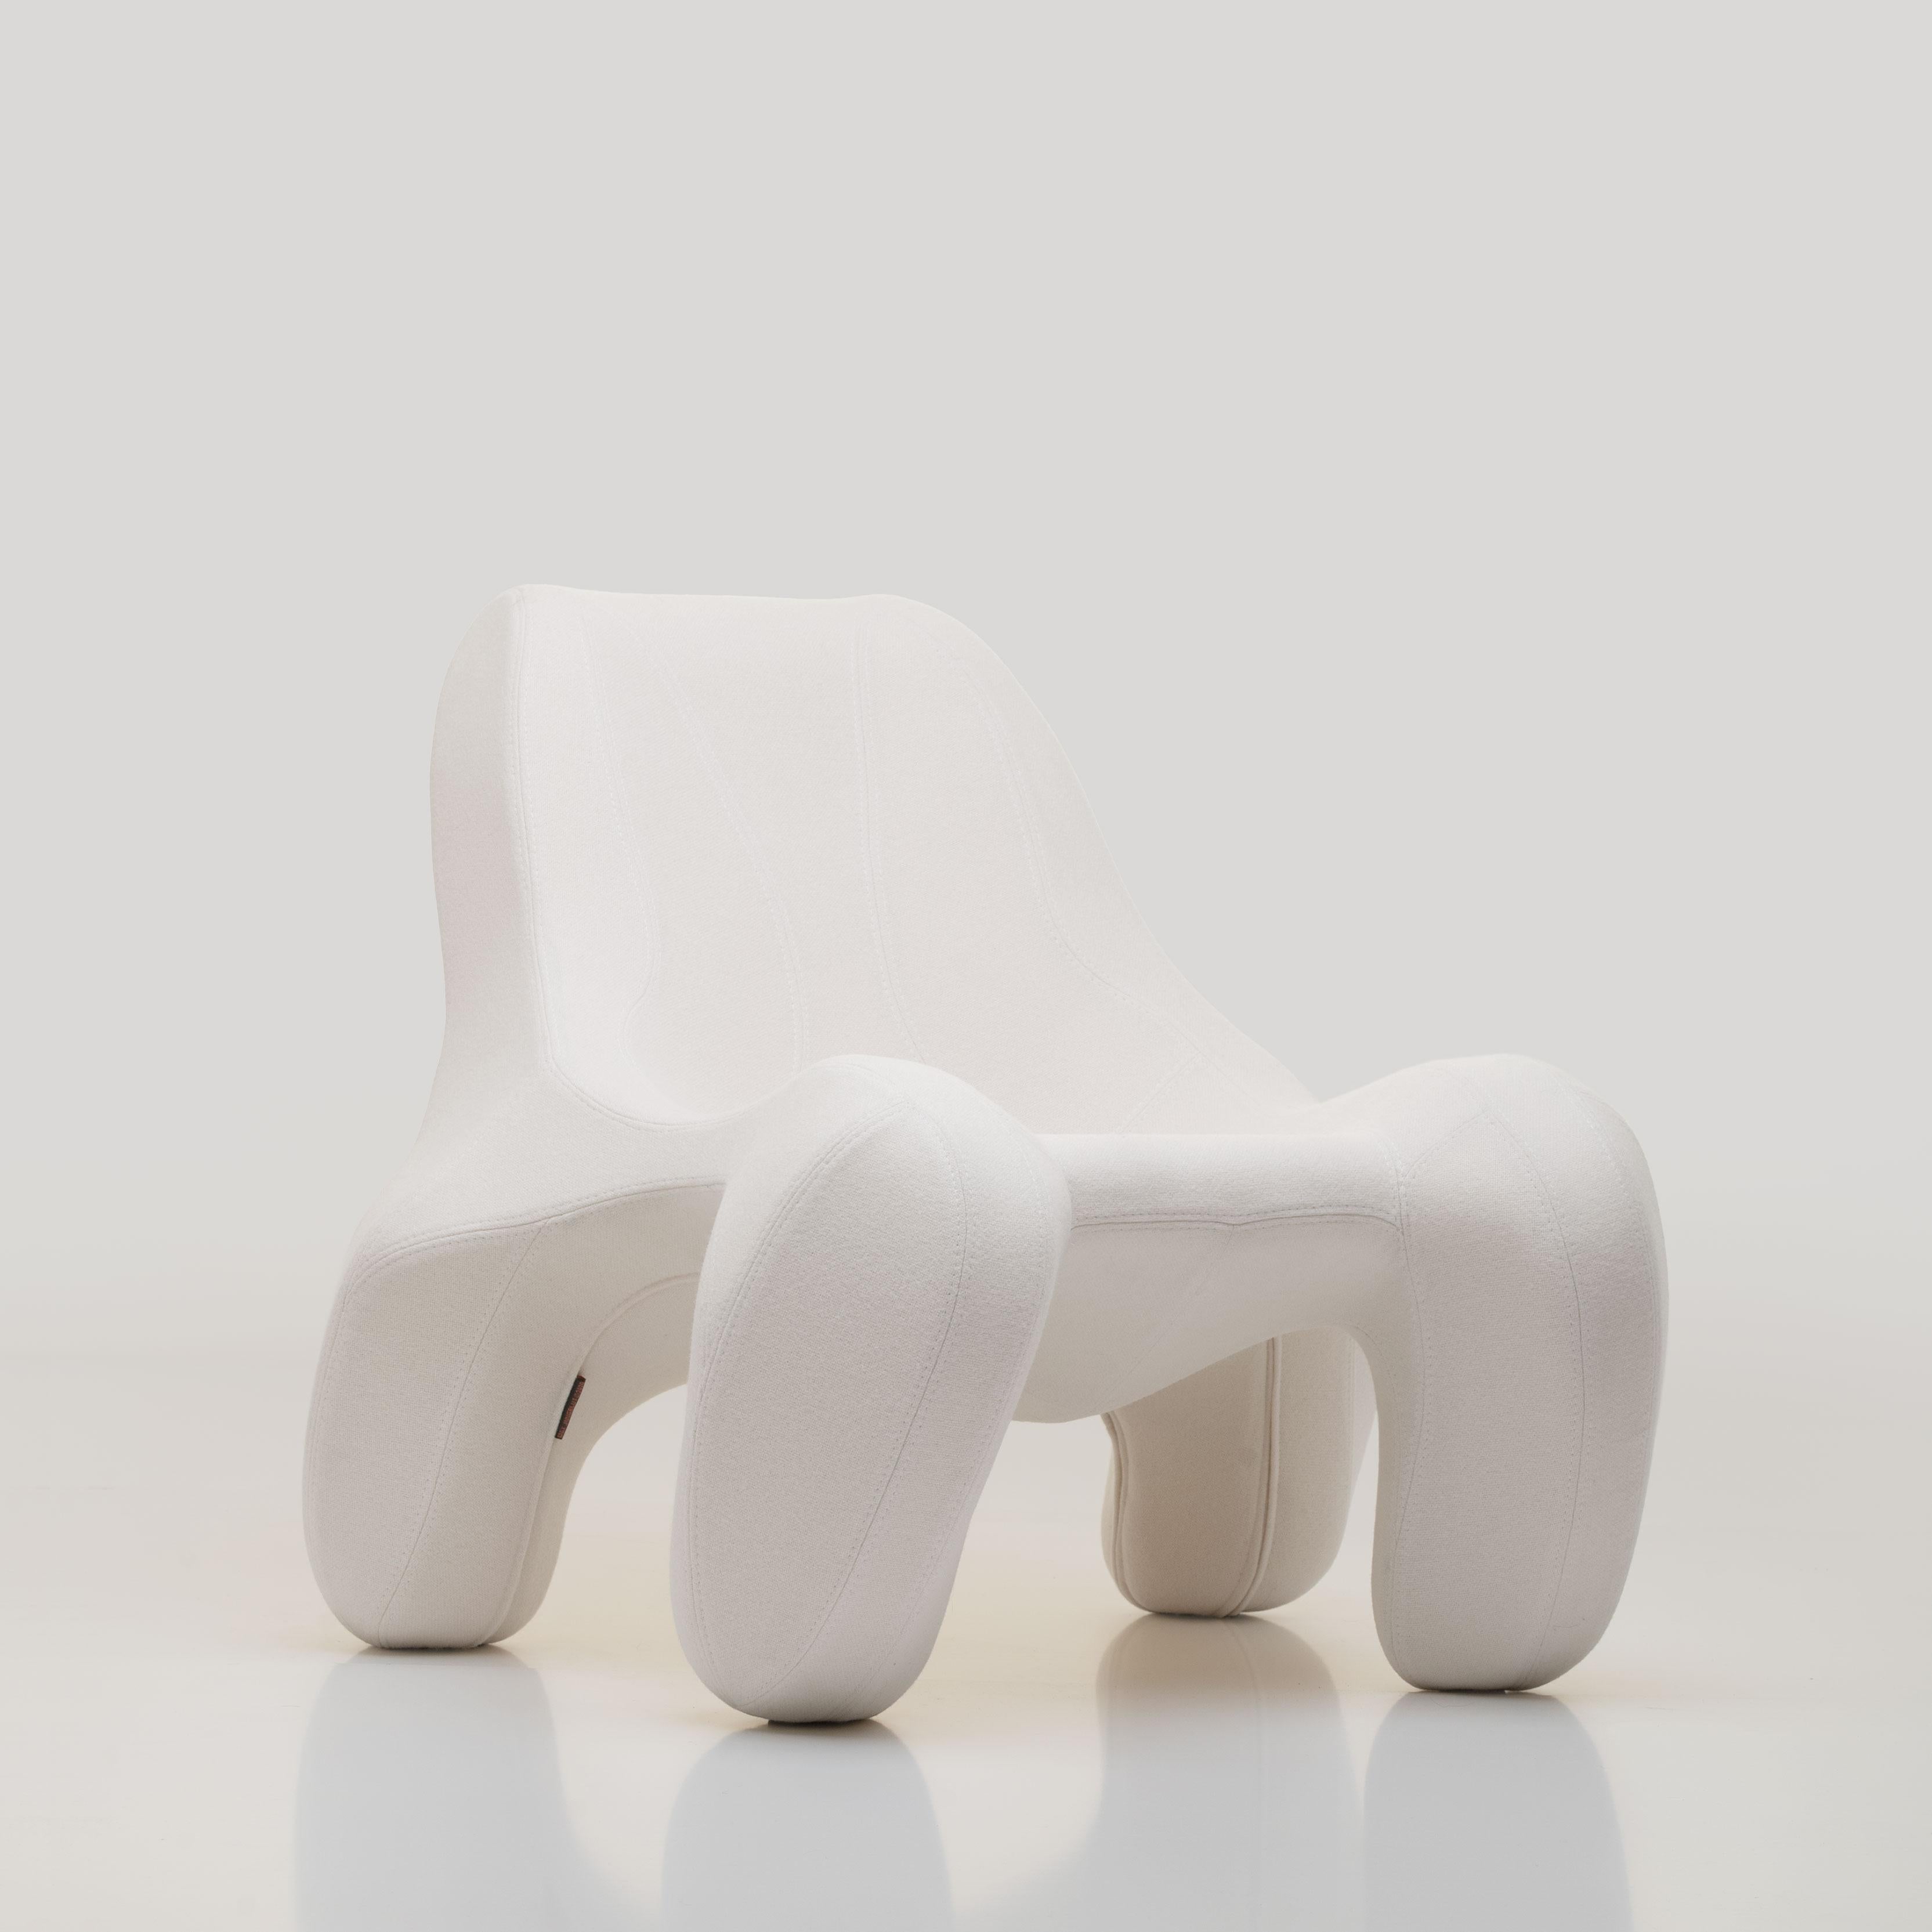 This masterpiece is upholstered with the best expertise in a white full-cloth 100% wool woven finish product by Kvadrat.
The ultimate seating is designed and handcrafted in the Netherlands. 

The club armchair, Club 112 series by Max Jungblut ® has